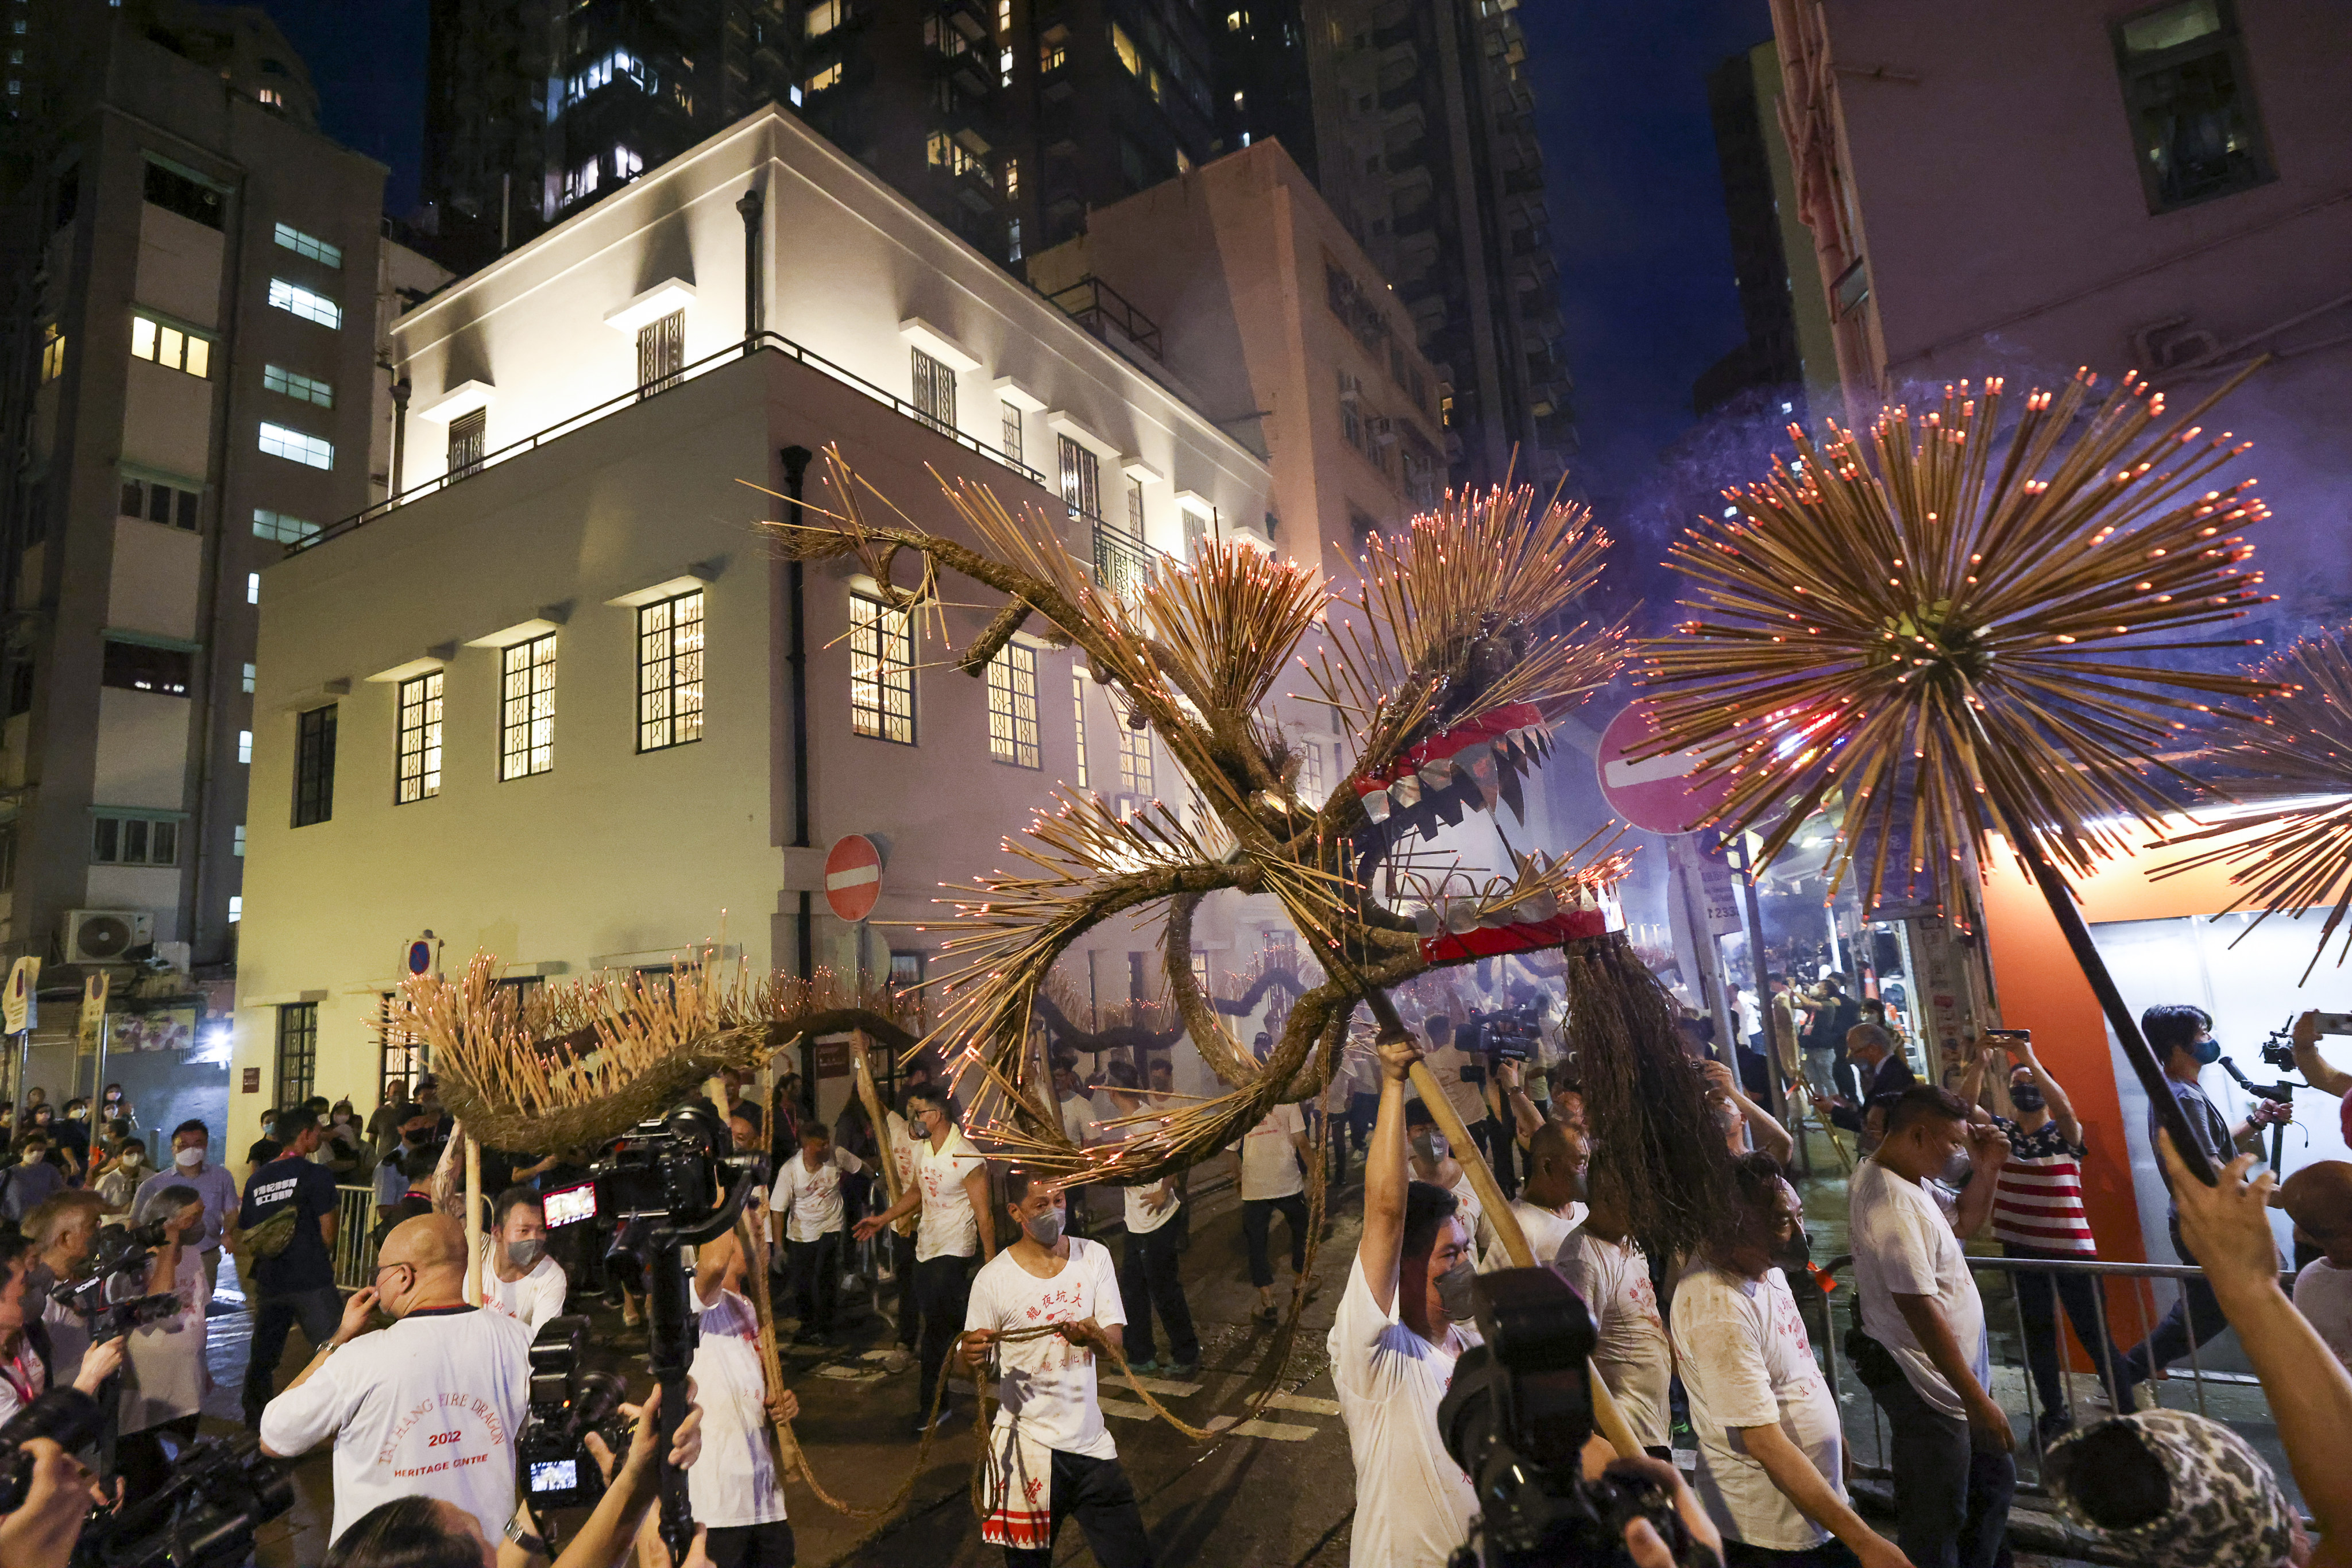 The dragon dance will be held on three evenings in Tai Hang from September 28 to 30. Photo: Nora Tam